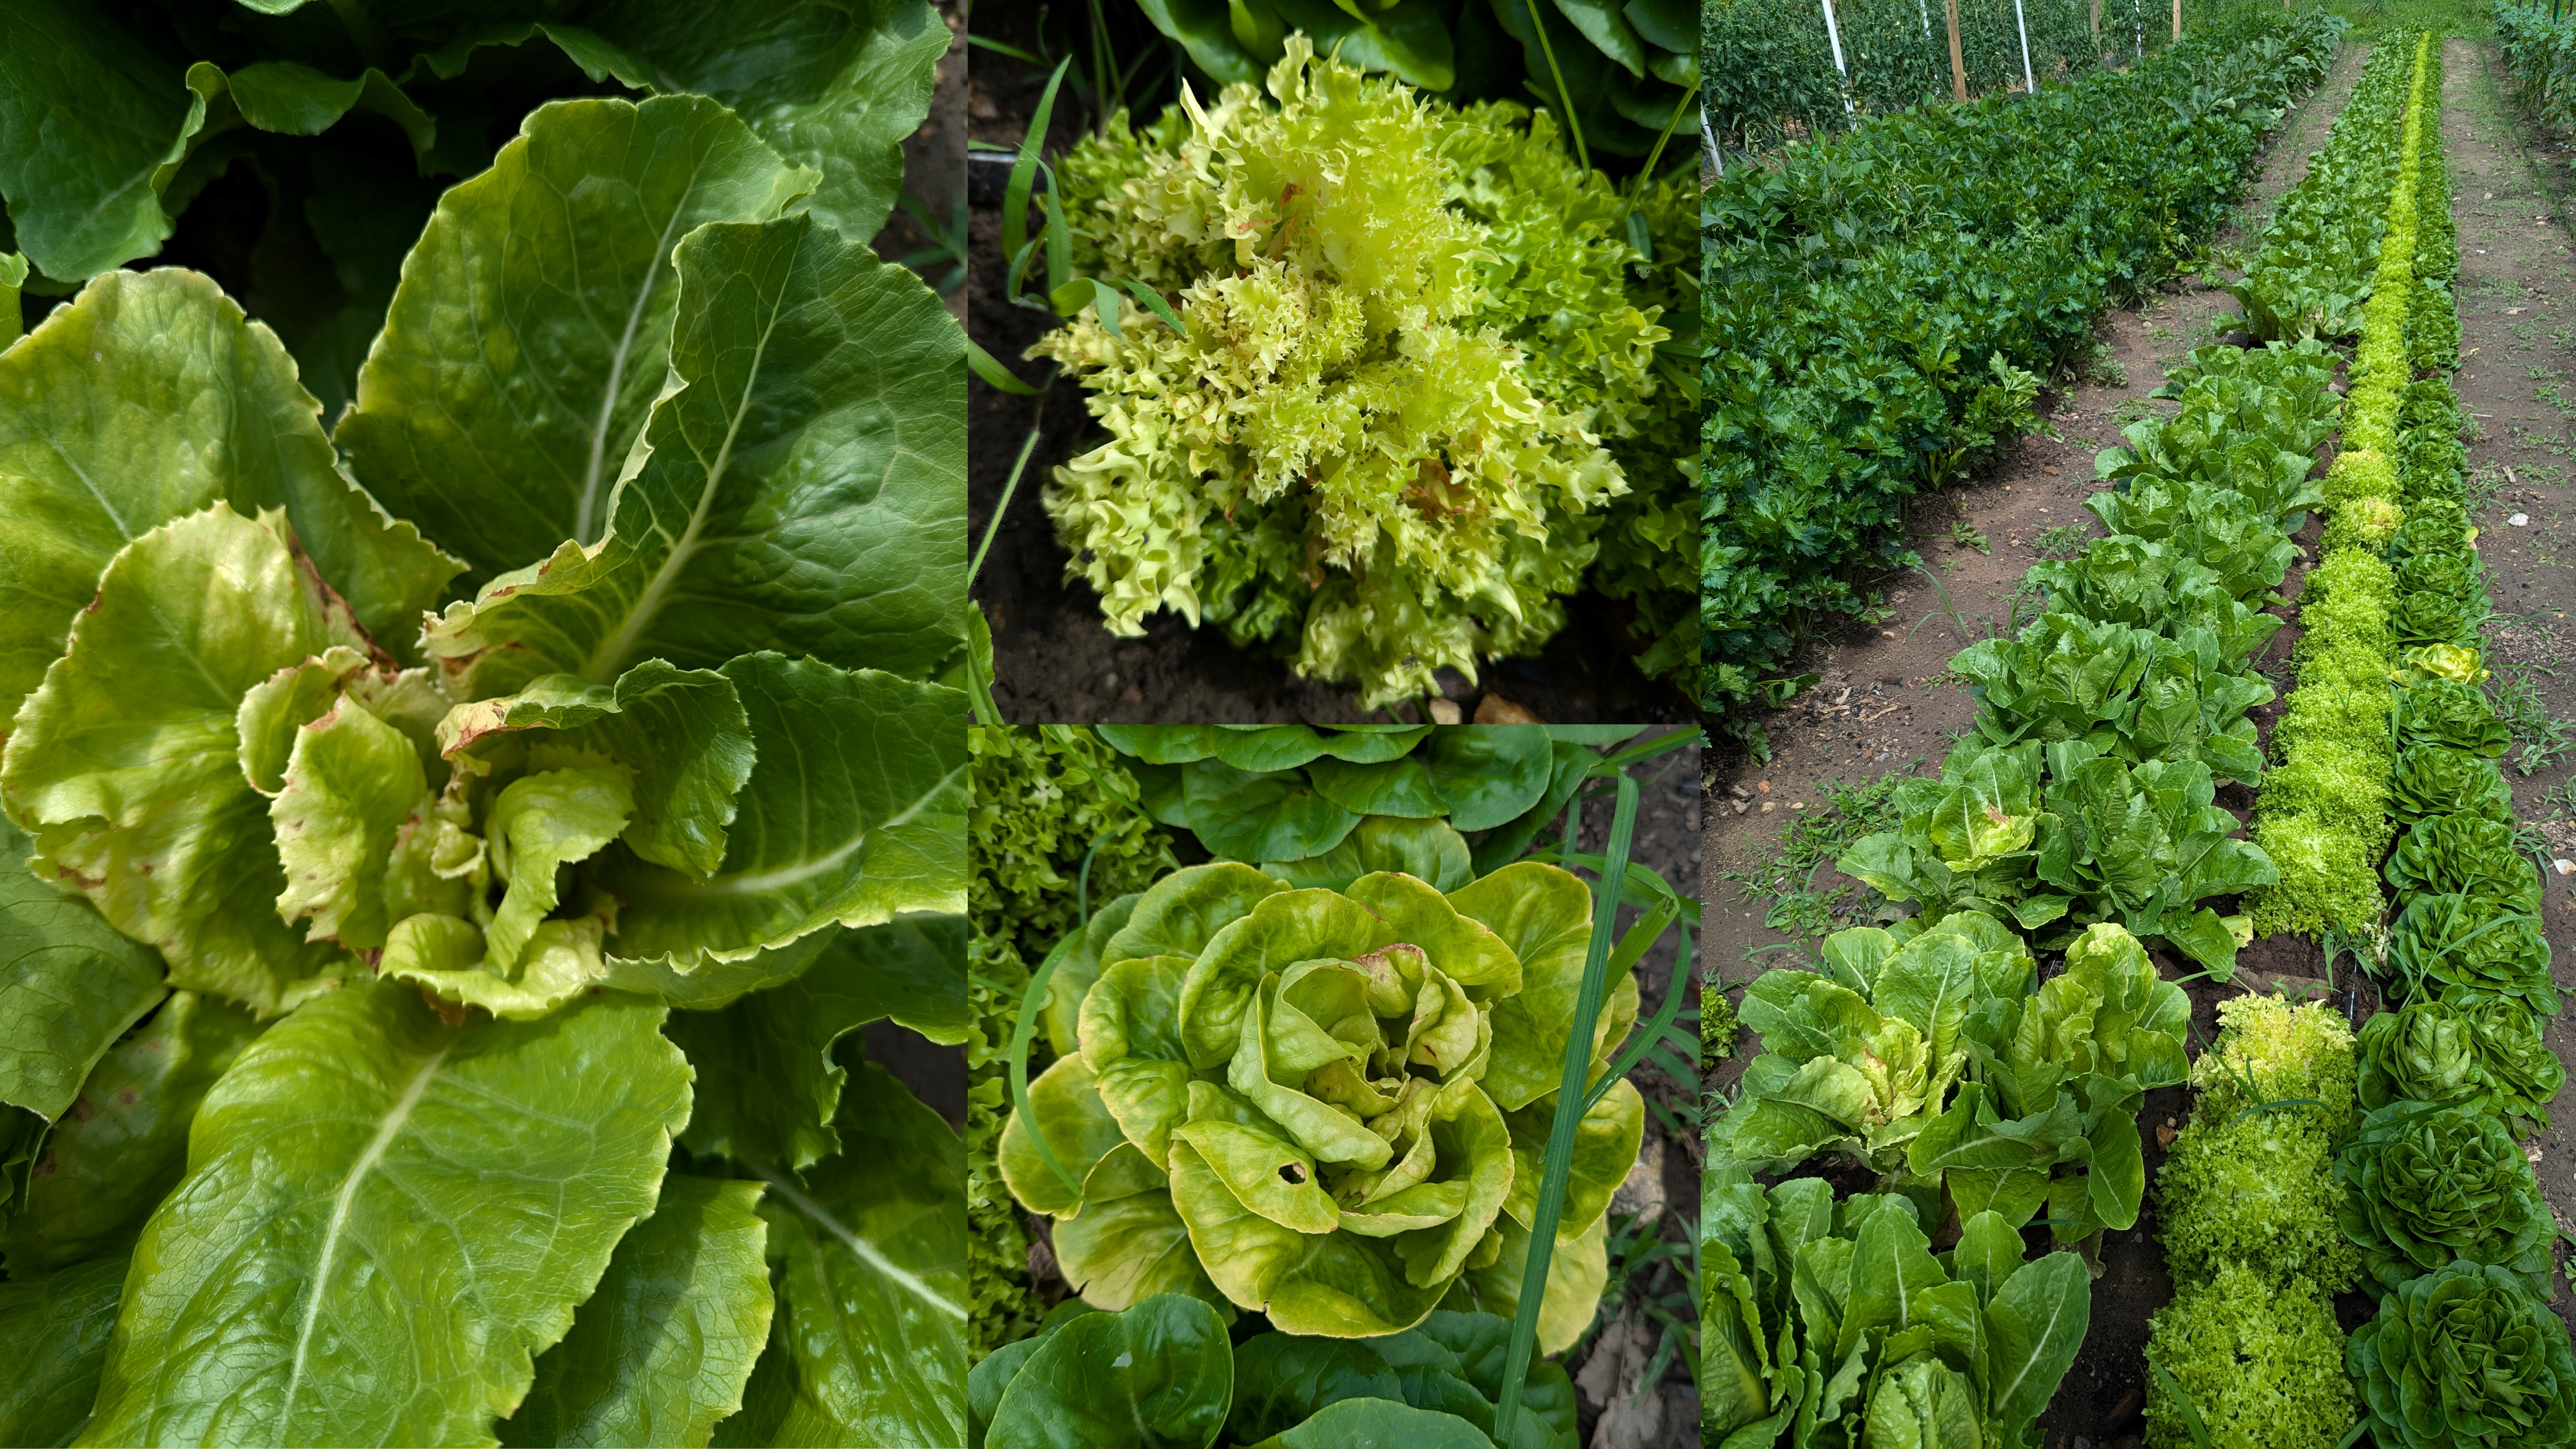 Yellows symptoms in lettuces.